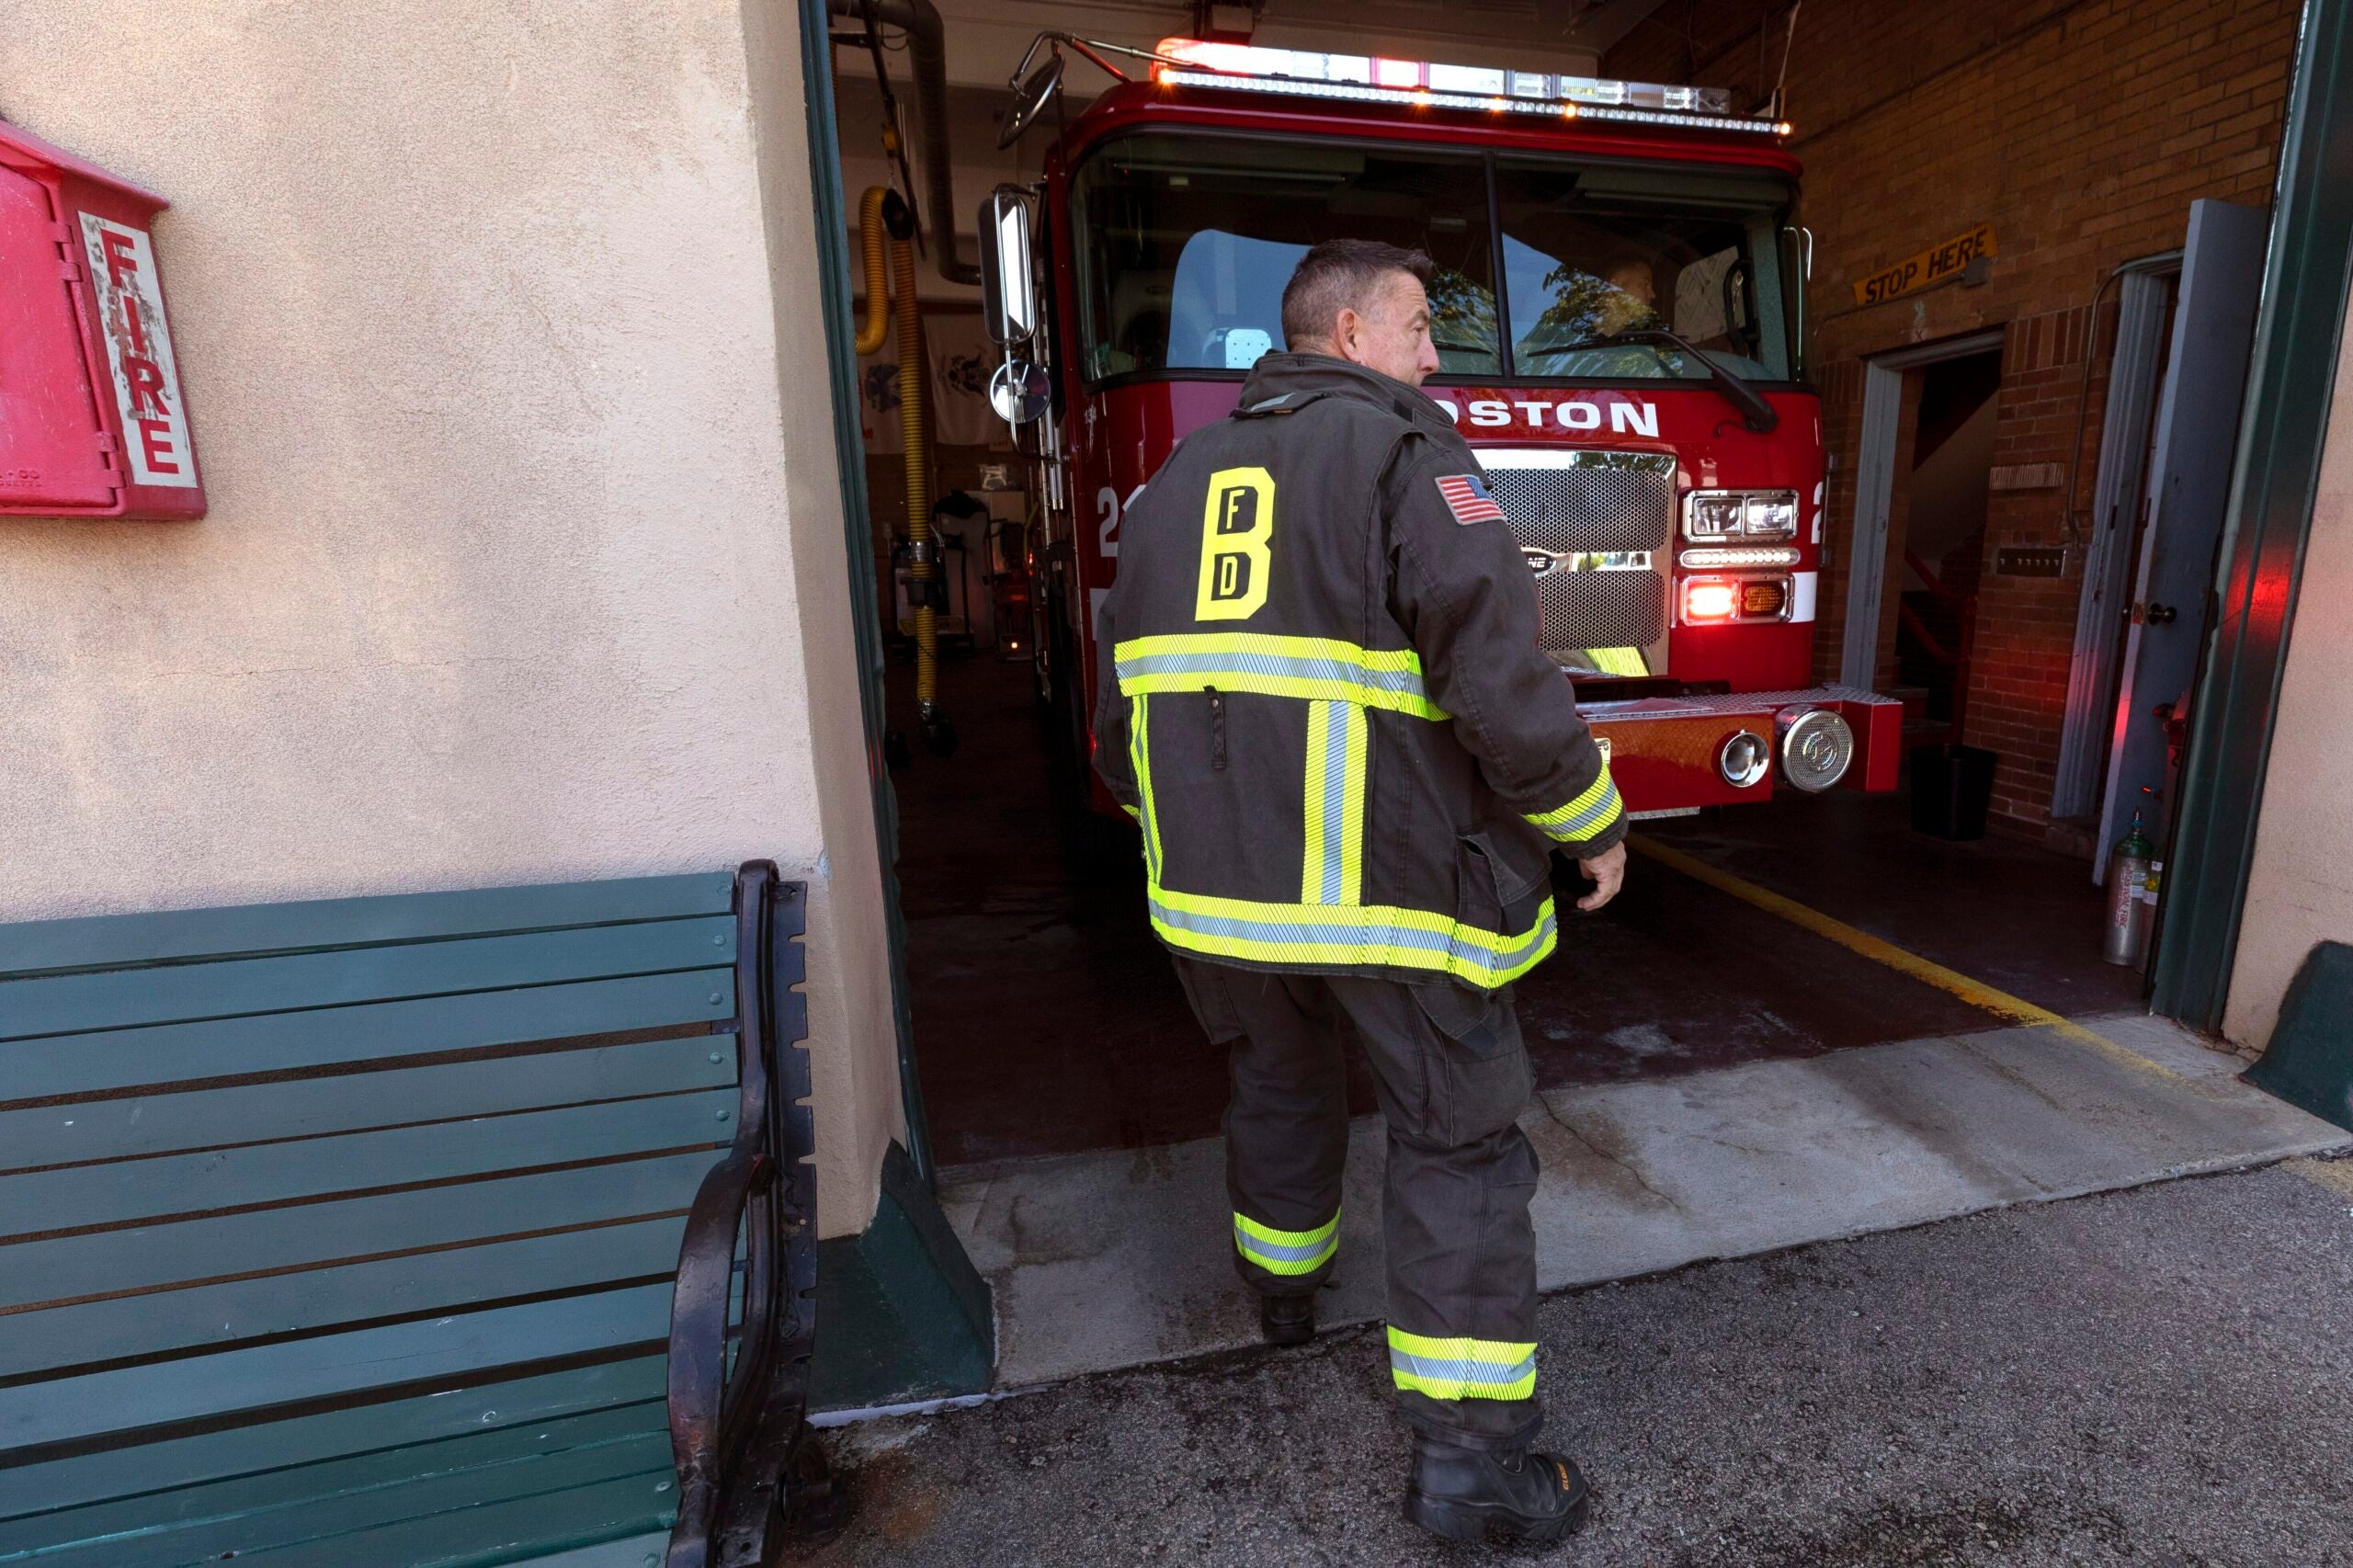 Firefighter Rod MacKinnon wears his turnout gear as he enters the Engine 21 fire station in Dorchester. 